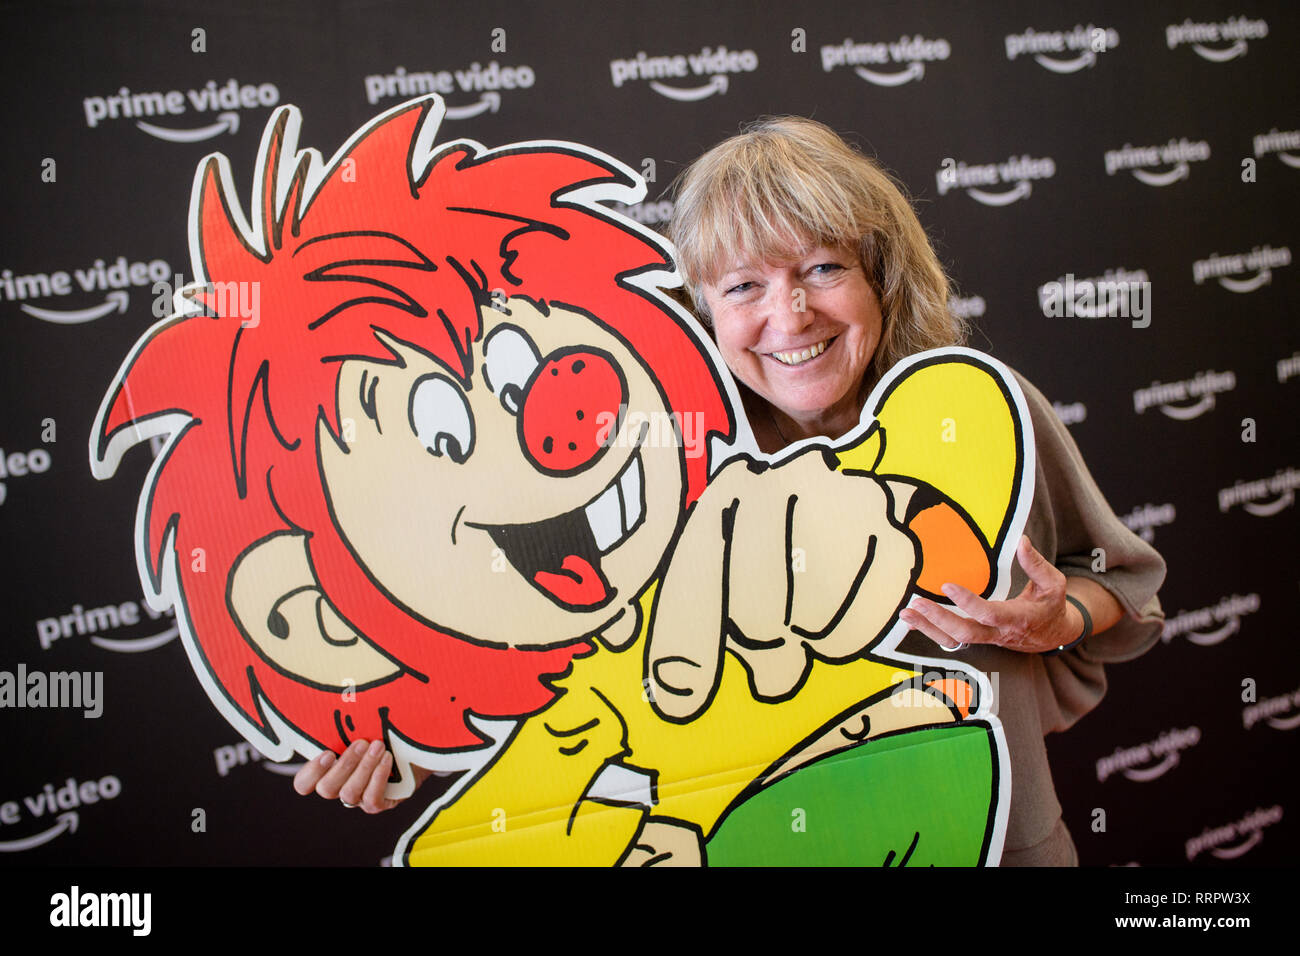 26 February 2019, Bavaria, München: Uschi Bagnall, daughter of the  children's book author and Pumuckl inventor Ellis Kaut, poses at a press  event of Amazon Prime Video for the broadcast of the